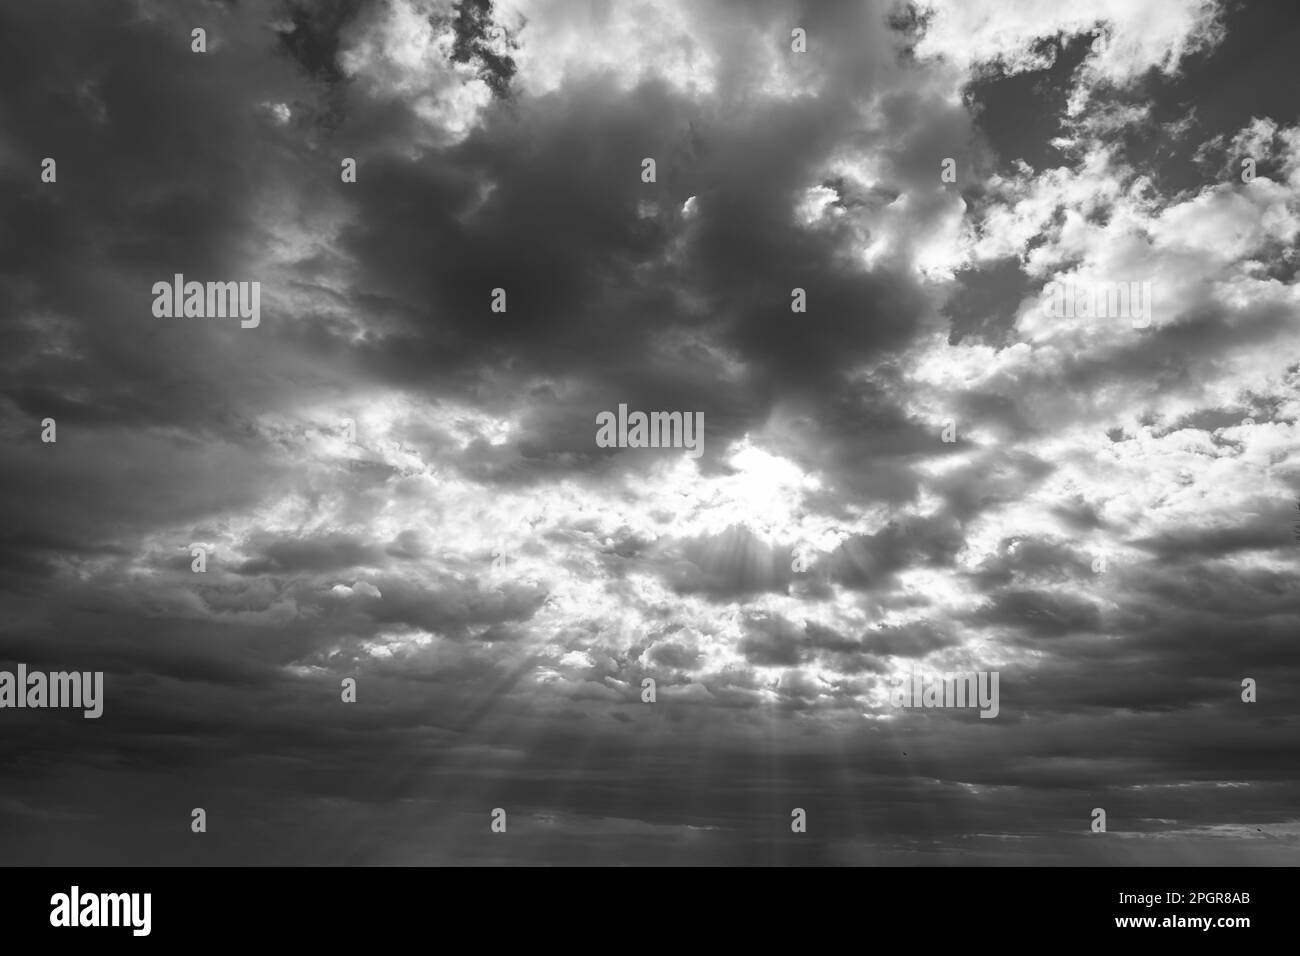 Sunrays and cloudscape. Overcast sky or stormy weather background. Religion or heavenly concept photo. Stock Photo